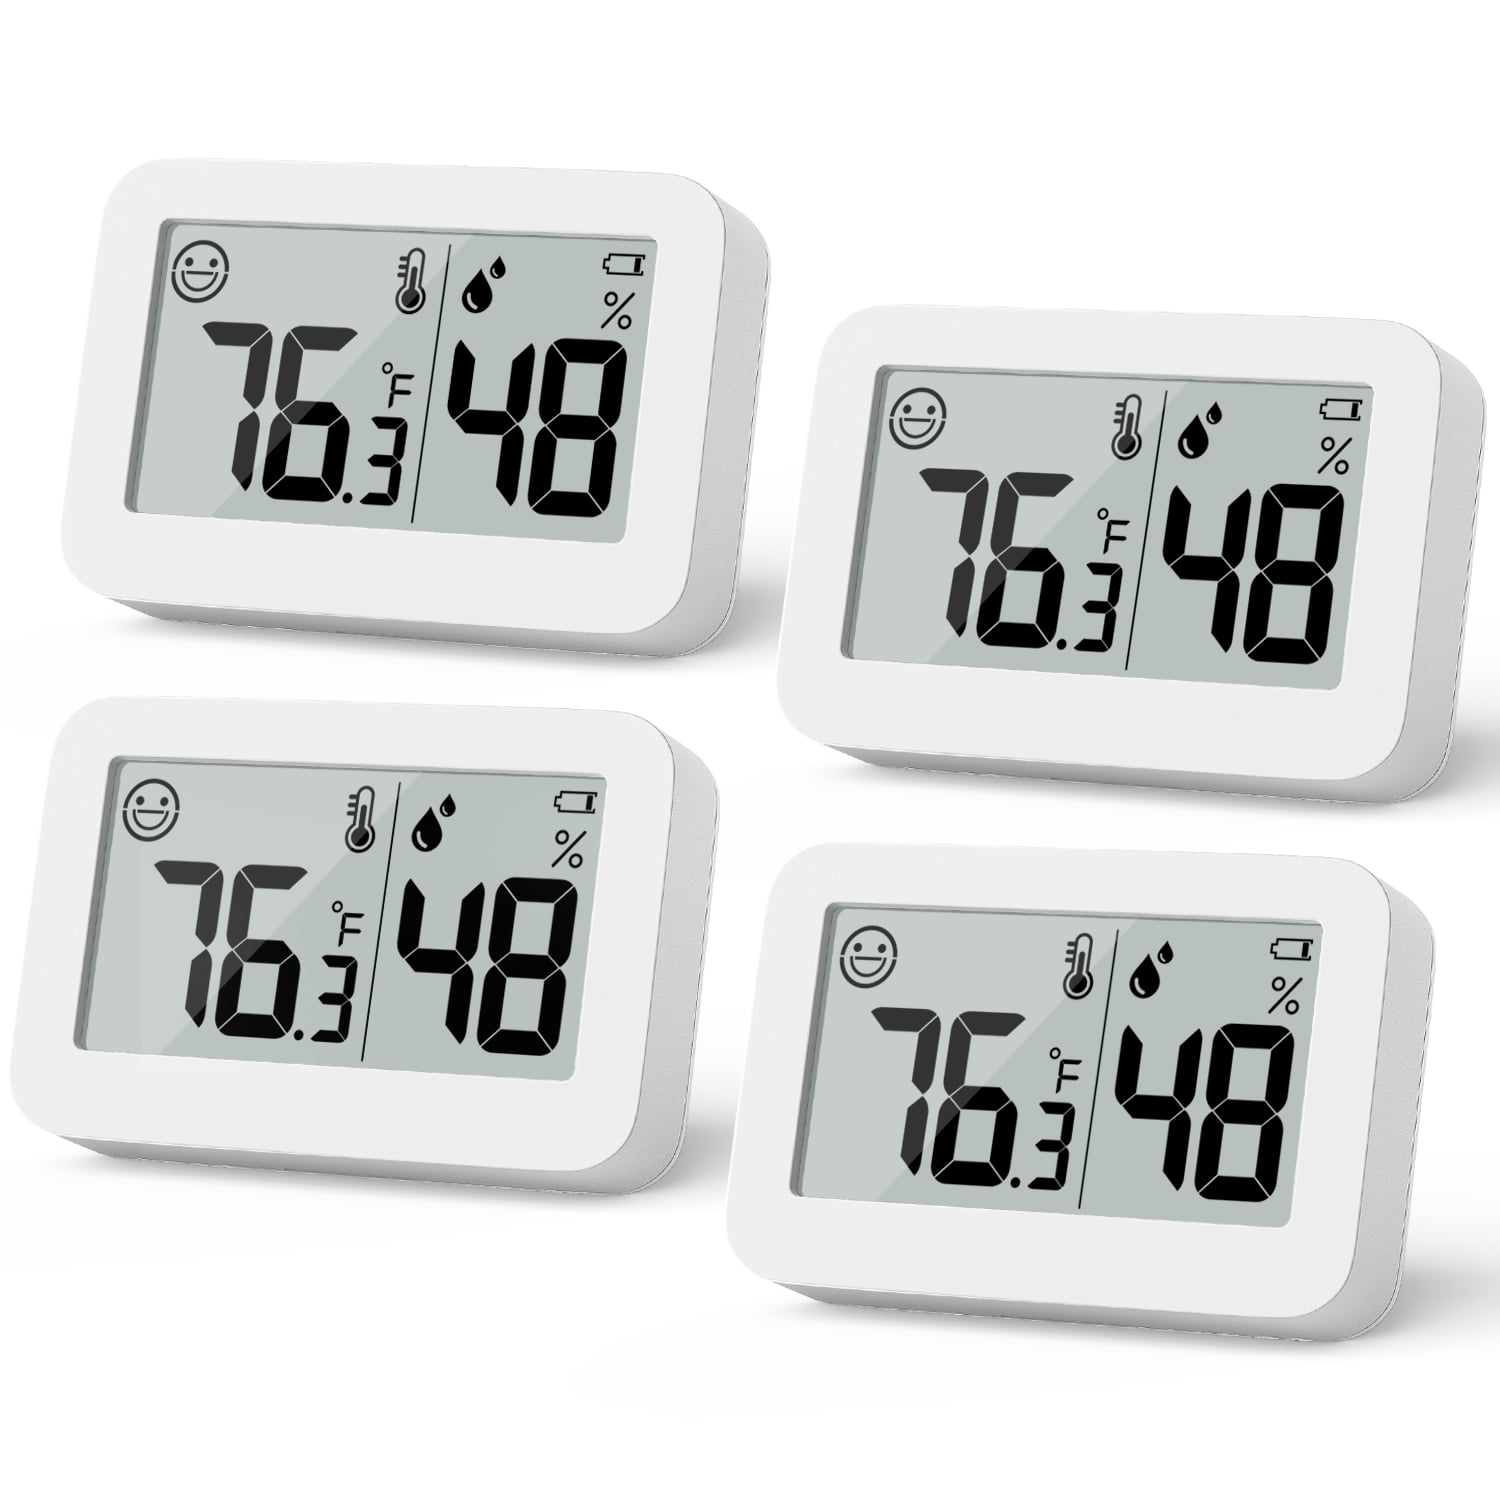 Towayer LCD Electronic Digital Thermometer Room Thermometer Smart  Hygrometer Object Home Pocket Thermometer